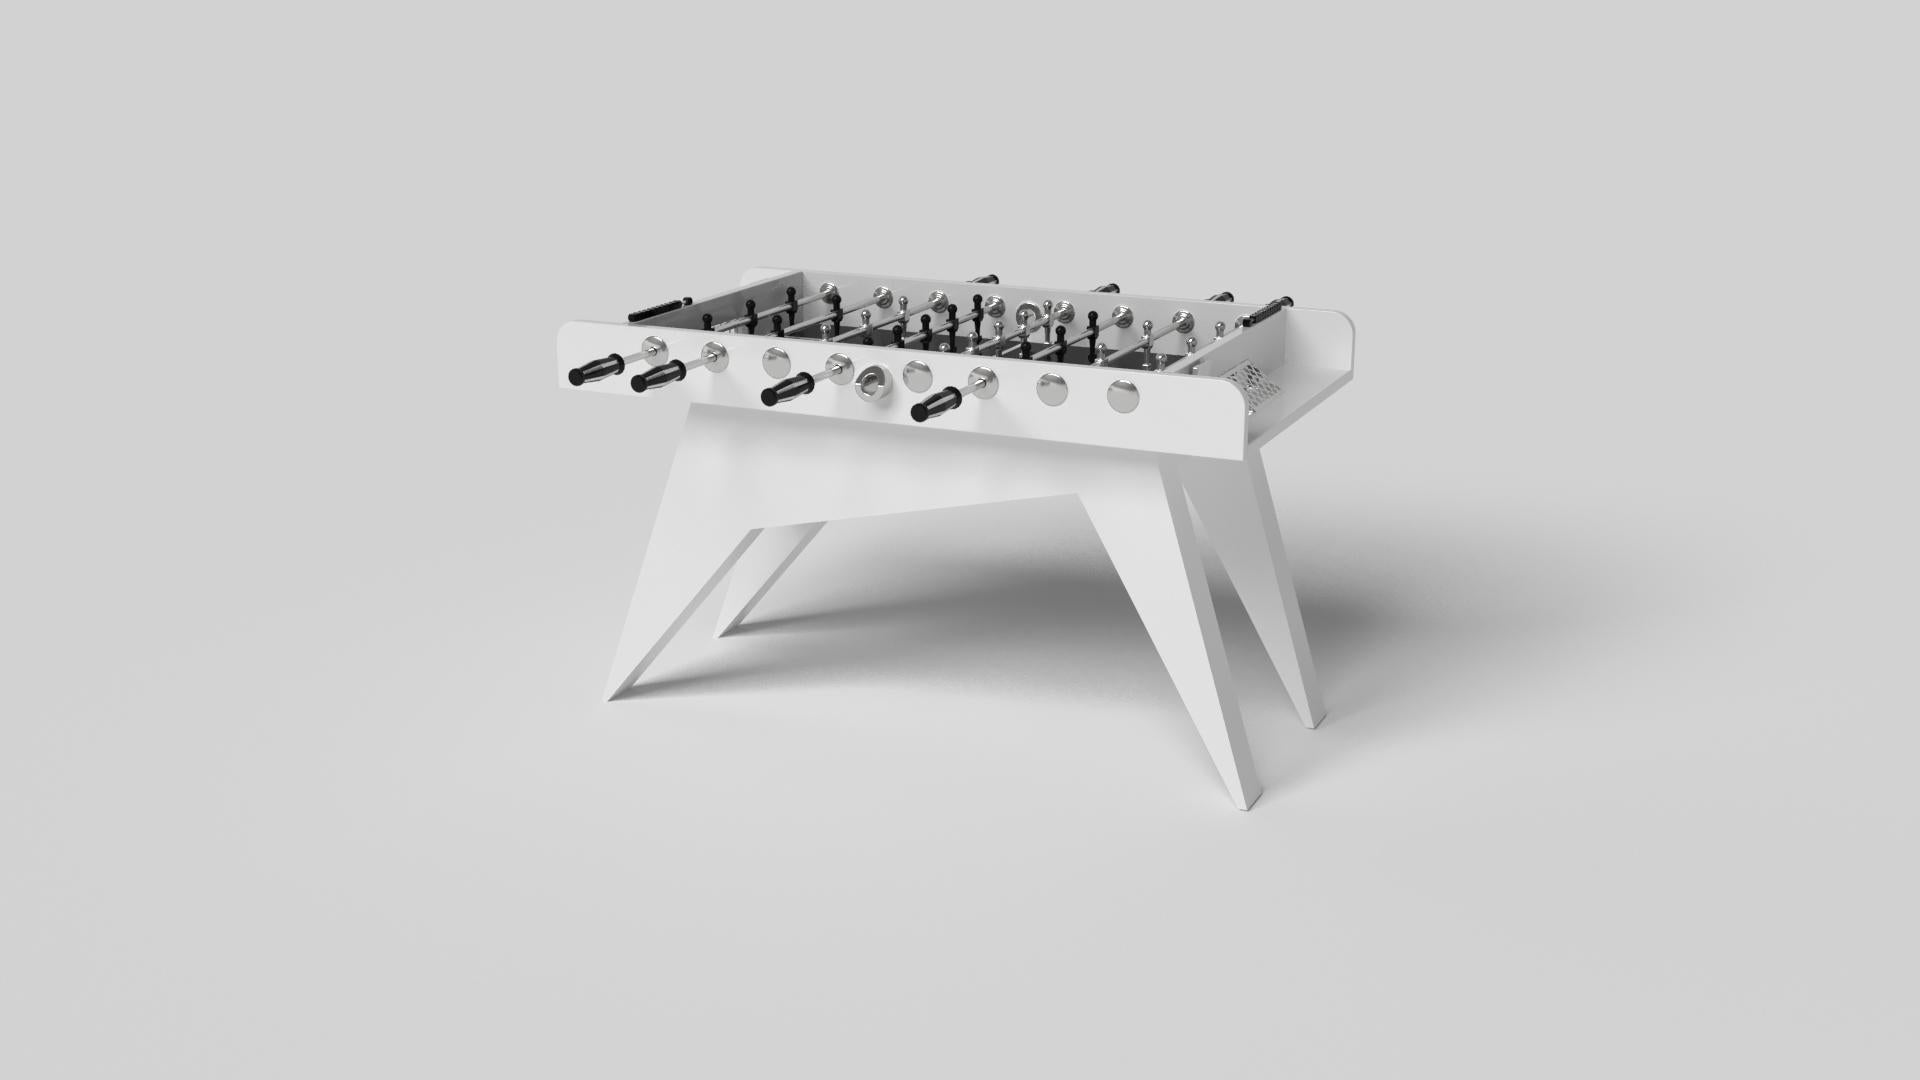 Simple yet sophisticated, the Mantis foosball table puts a fresh, modern spin on a classic four-legged design. Sharp angles and tapered legs provide sleek stability.

Size:

62”X31”X36”